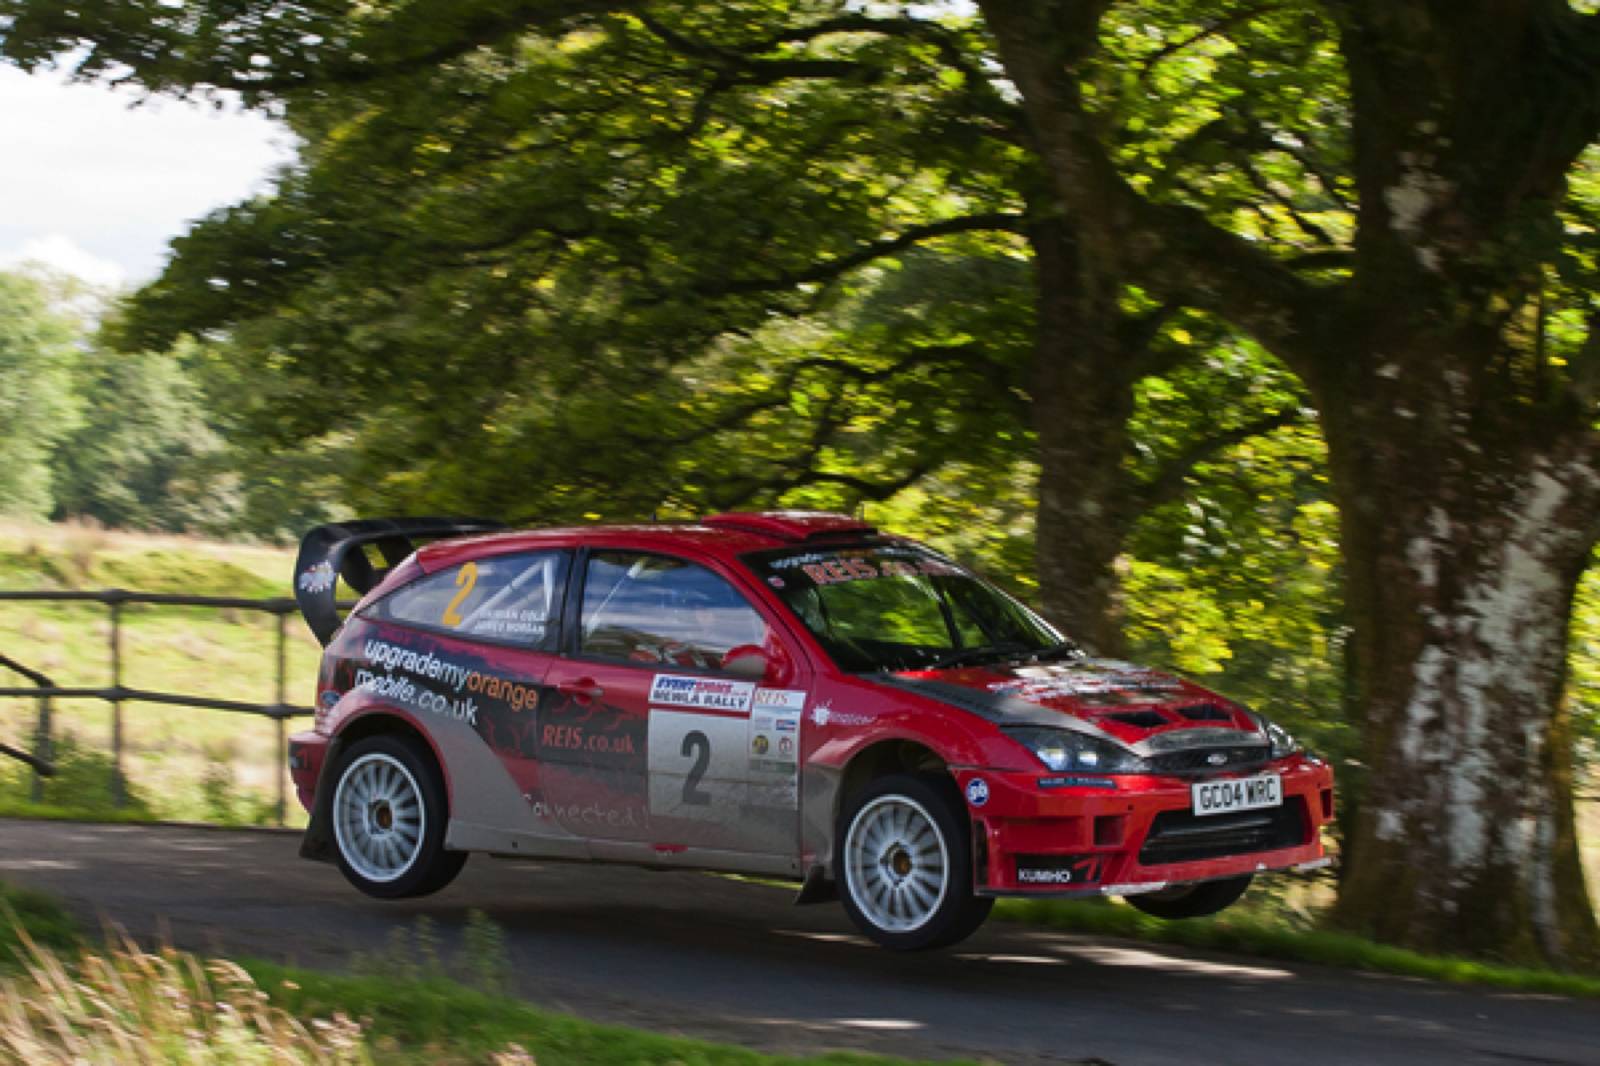 get-connected-rally-team-gallery-mewla-national-rally-2011-00002